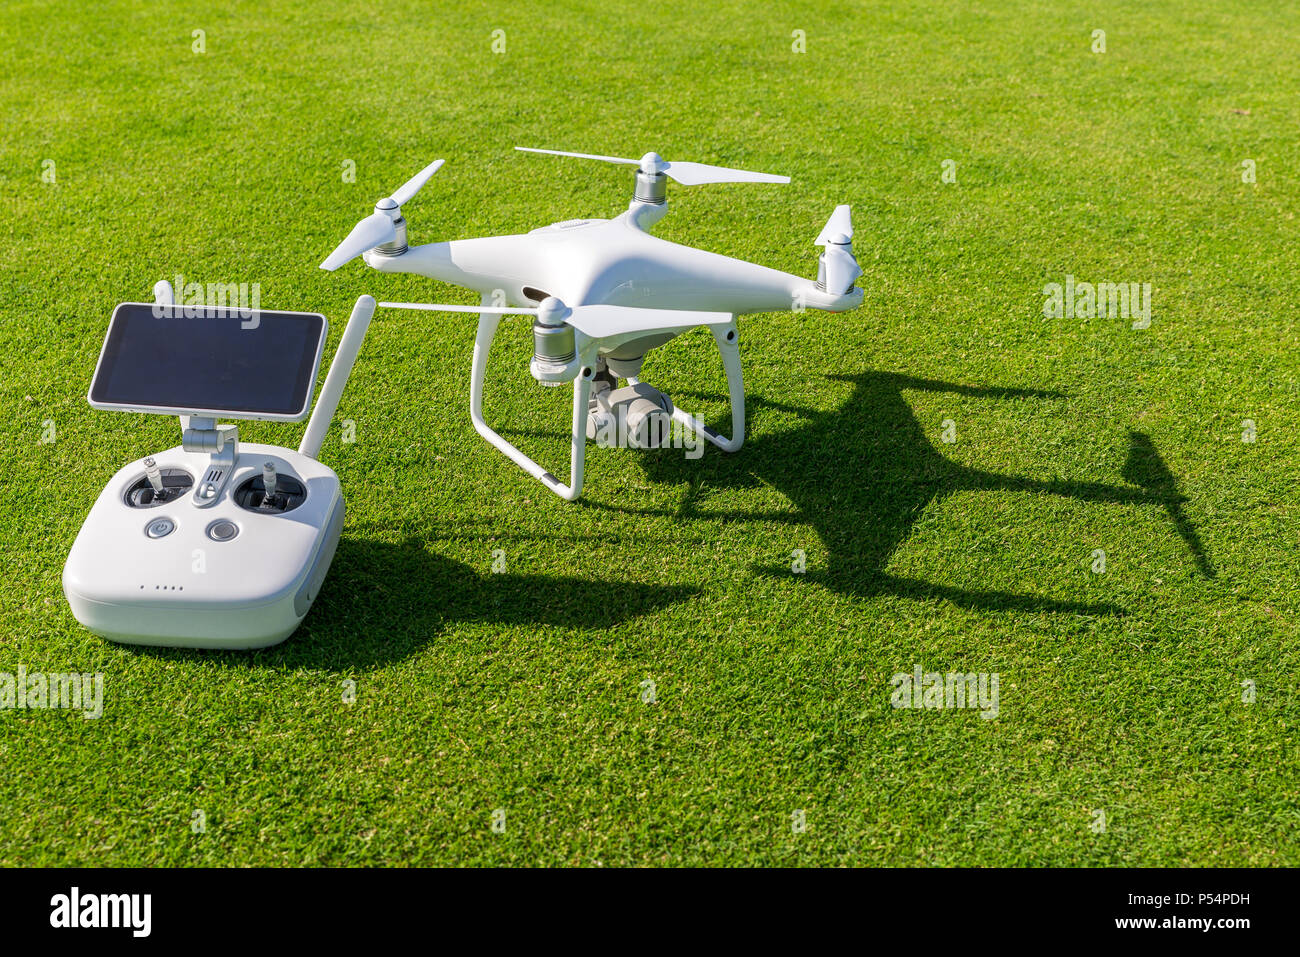 White professional quadcopter drone camera with remote control from above  against green grass in background Stock Photo - Alamy